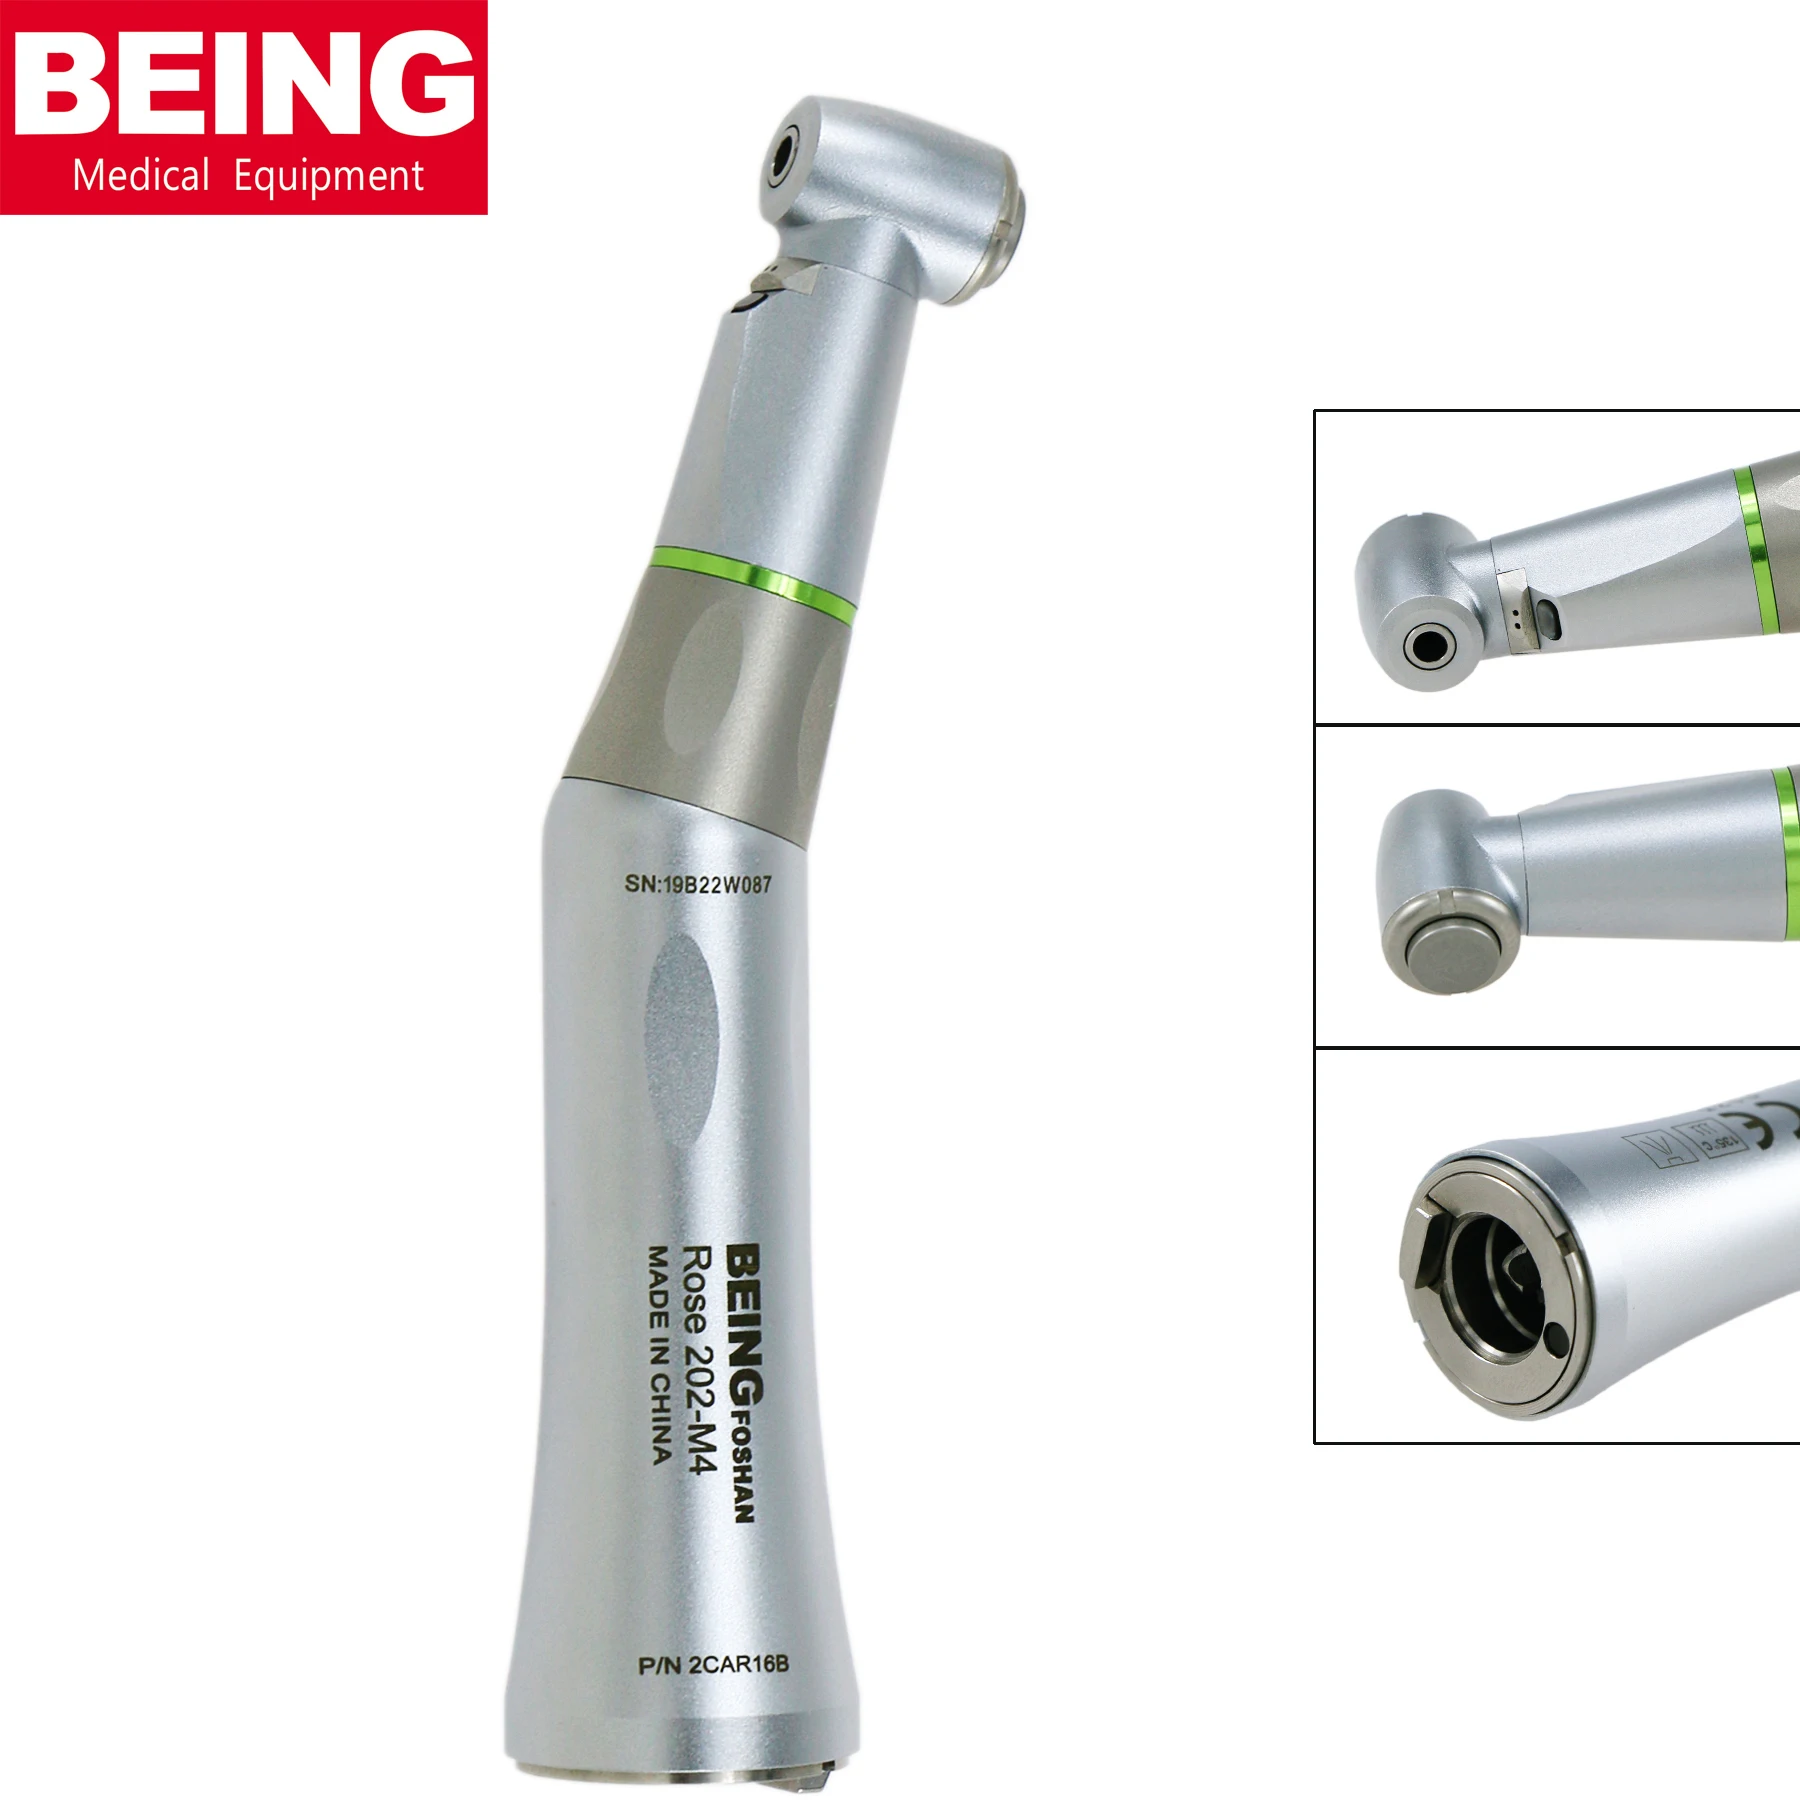 BEING Dental Fiber Optic Endo 16:1 Reduction Intra Head Low Speed Handpiece Contra Angle Fit KaVo NSK 202 CAR16 B